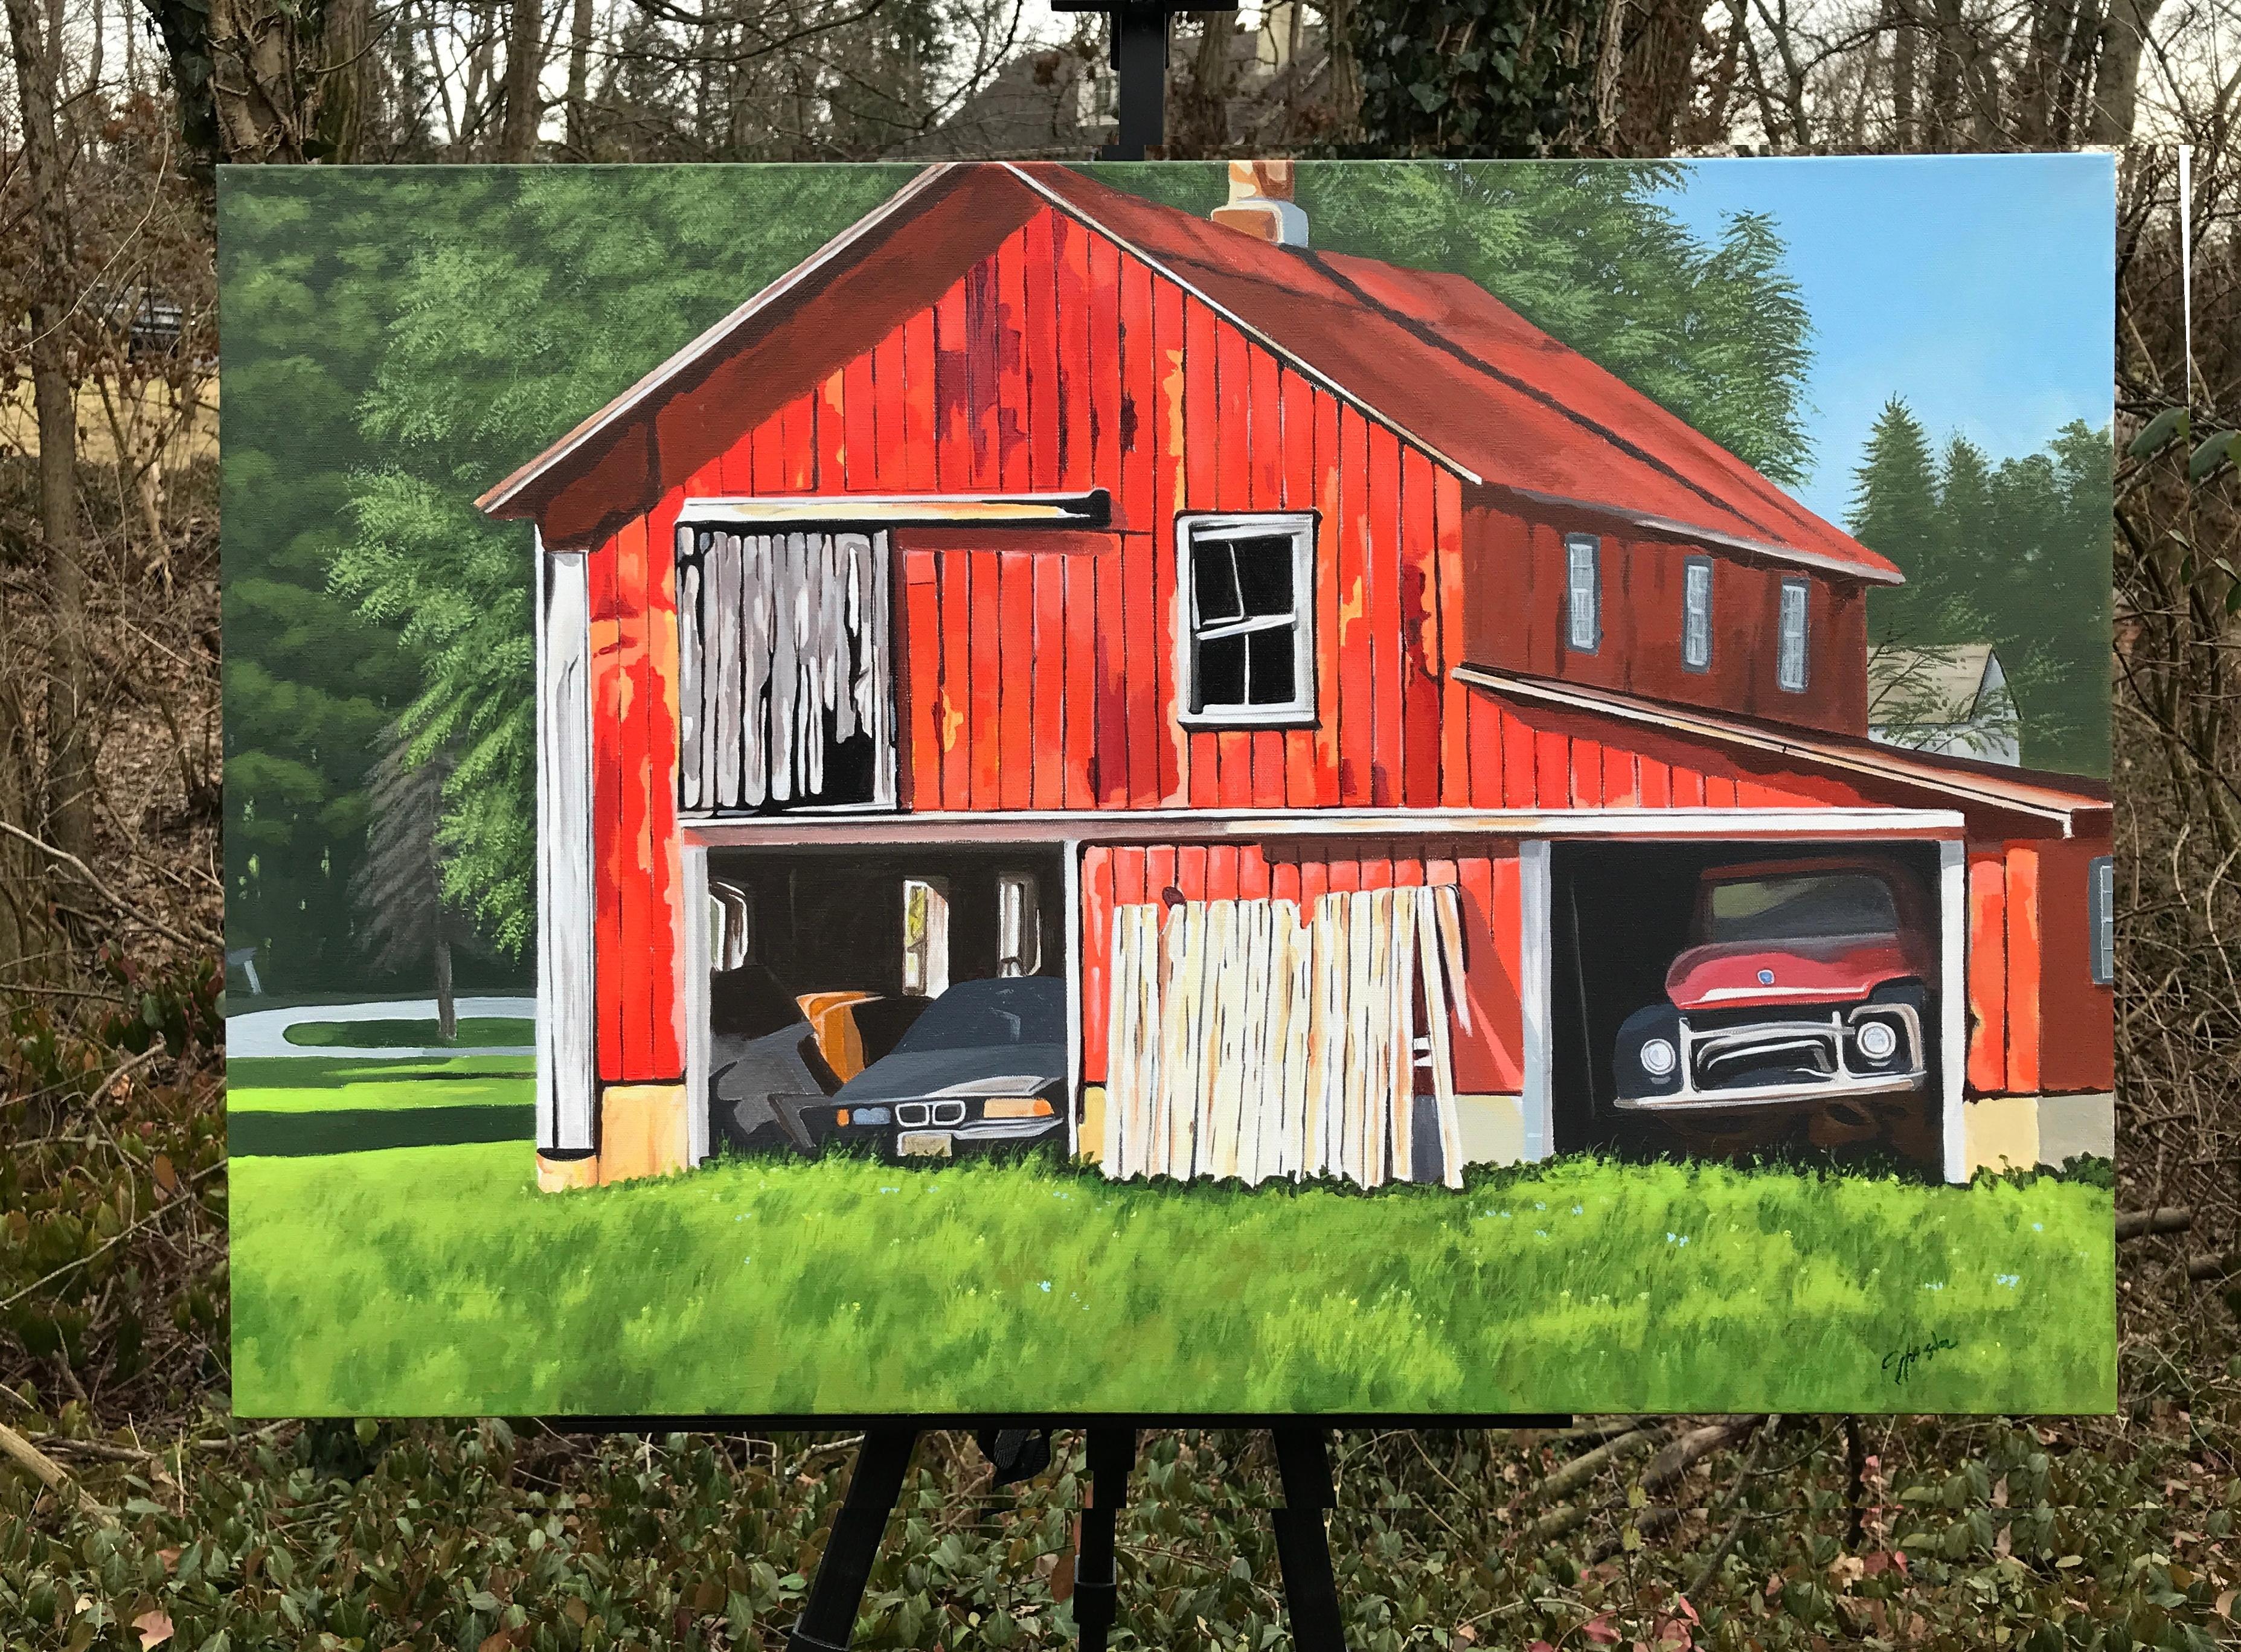 <p>Artist Comments<br>A weather-beaten red barn sits amidst the farm landscape, surrounded by trees and grass. Two open bays reveal a truck and a car, perhaps broken or lost but not forgotten. The bright color palette adds an alluring charm to the